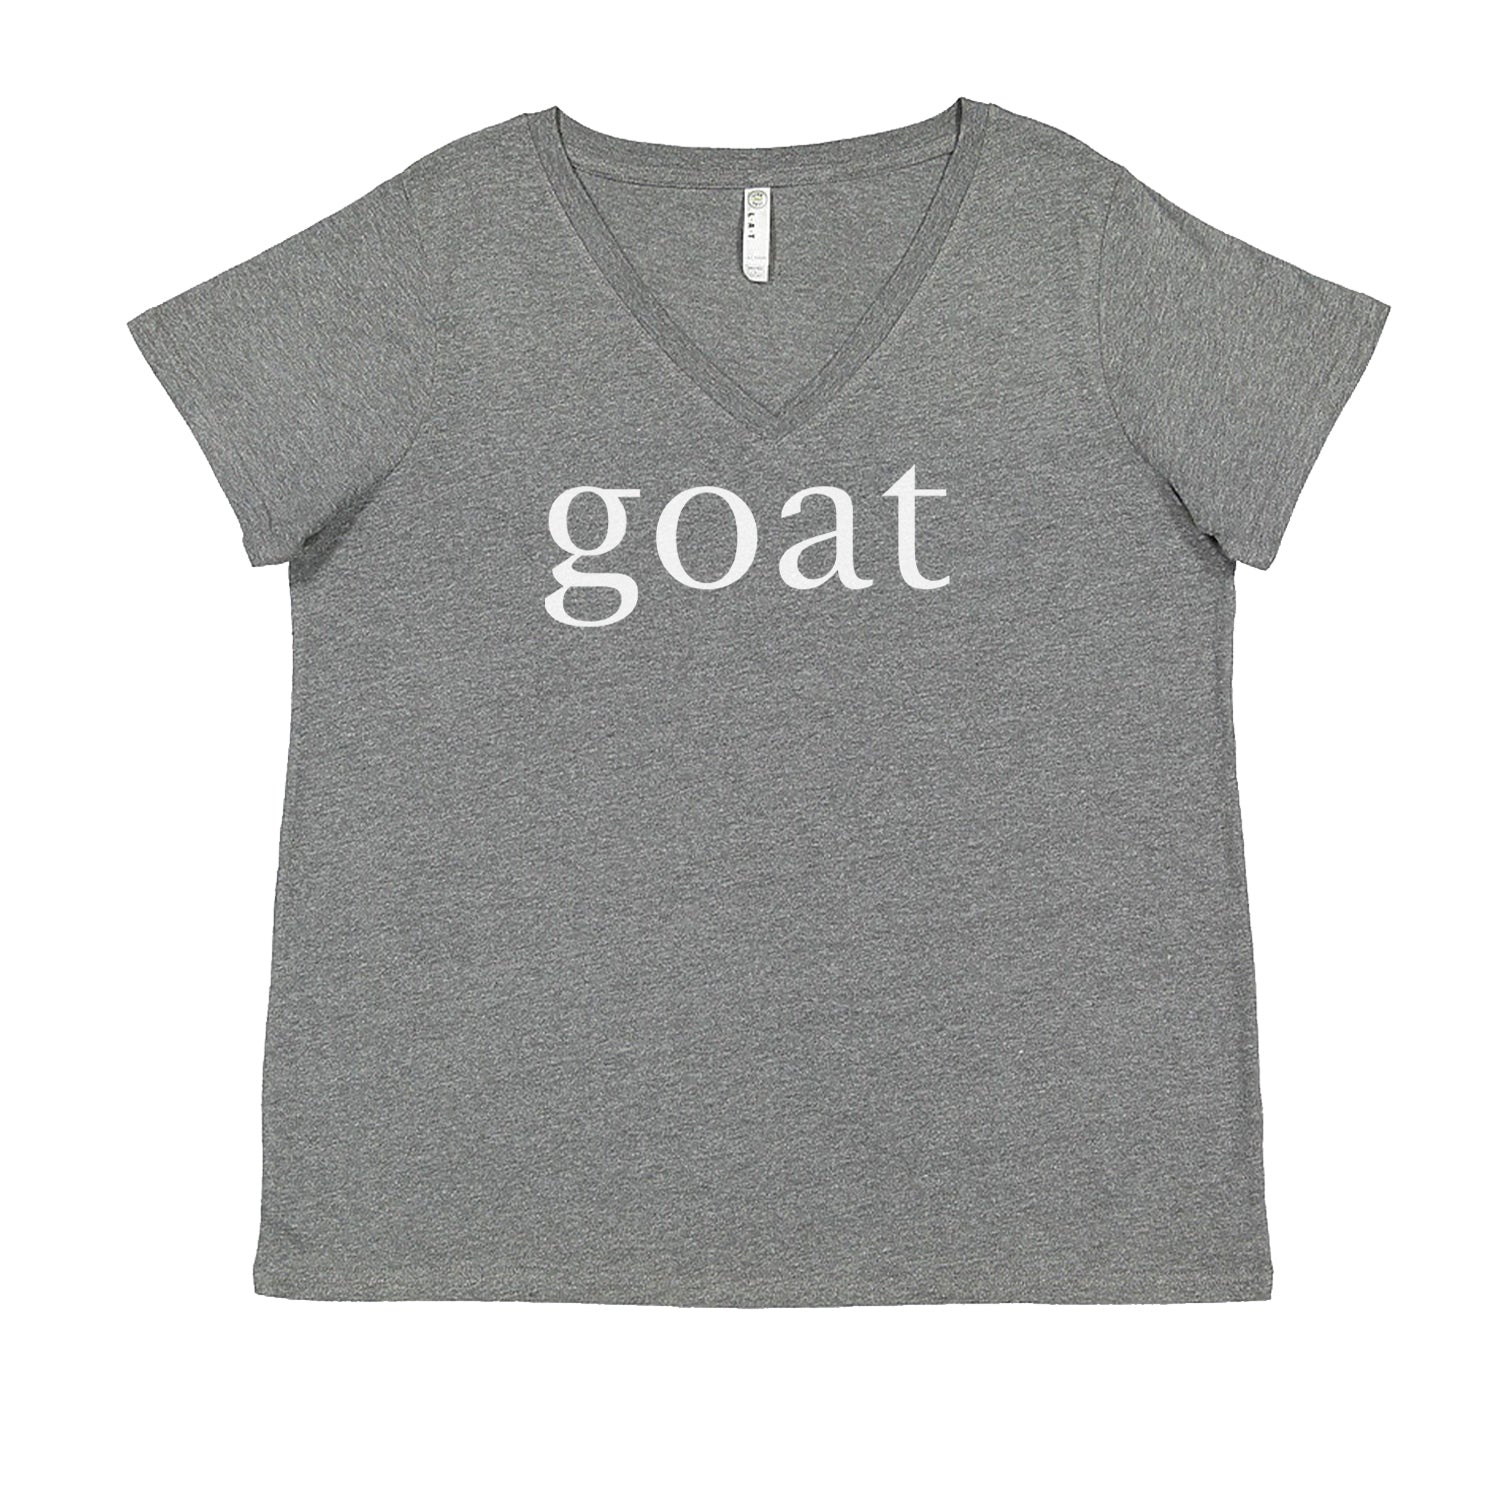 GOAT - Greatest Of All Time  Ladies V-Neck T-shirt Heather Grey